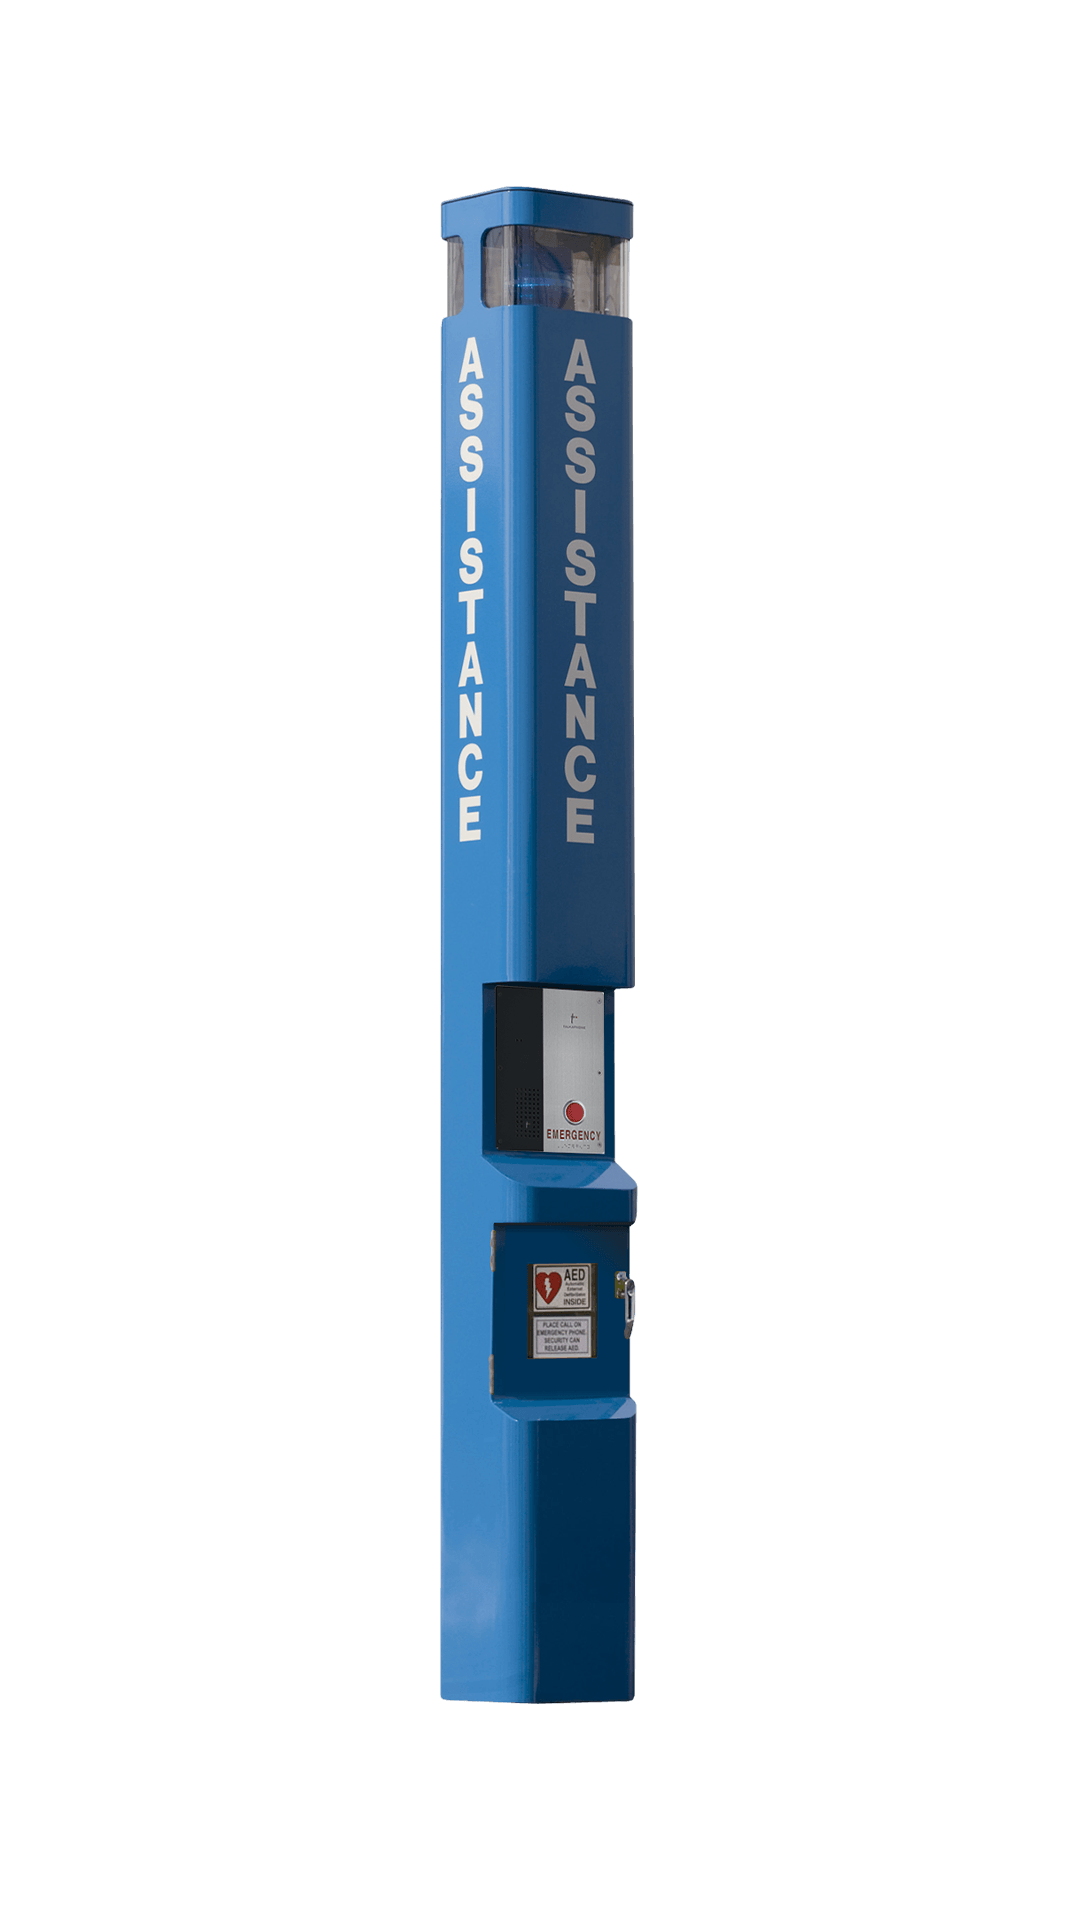 Radius Blue Light Phone Tower with Built-in AED Compartment